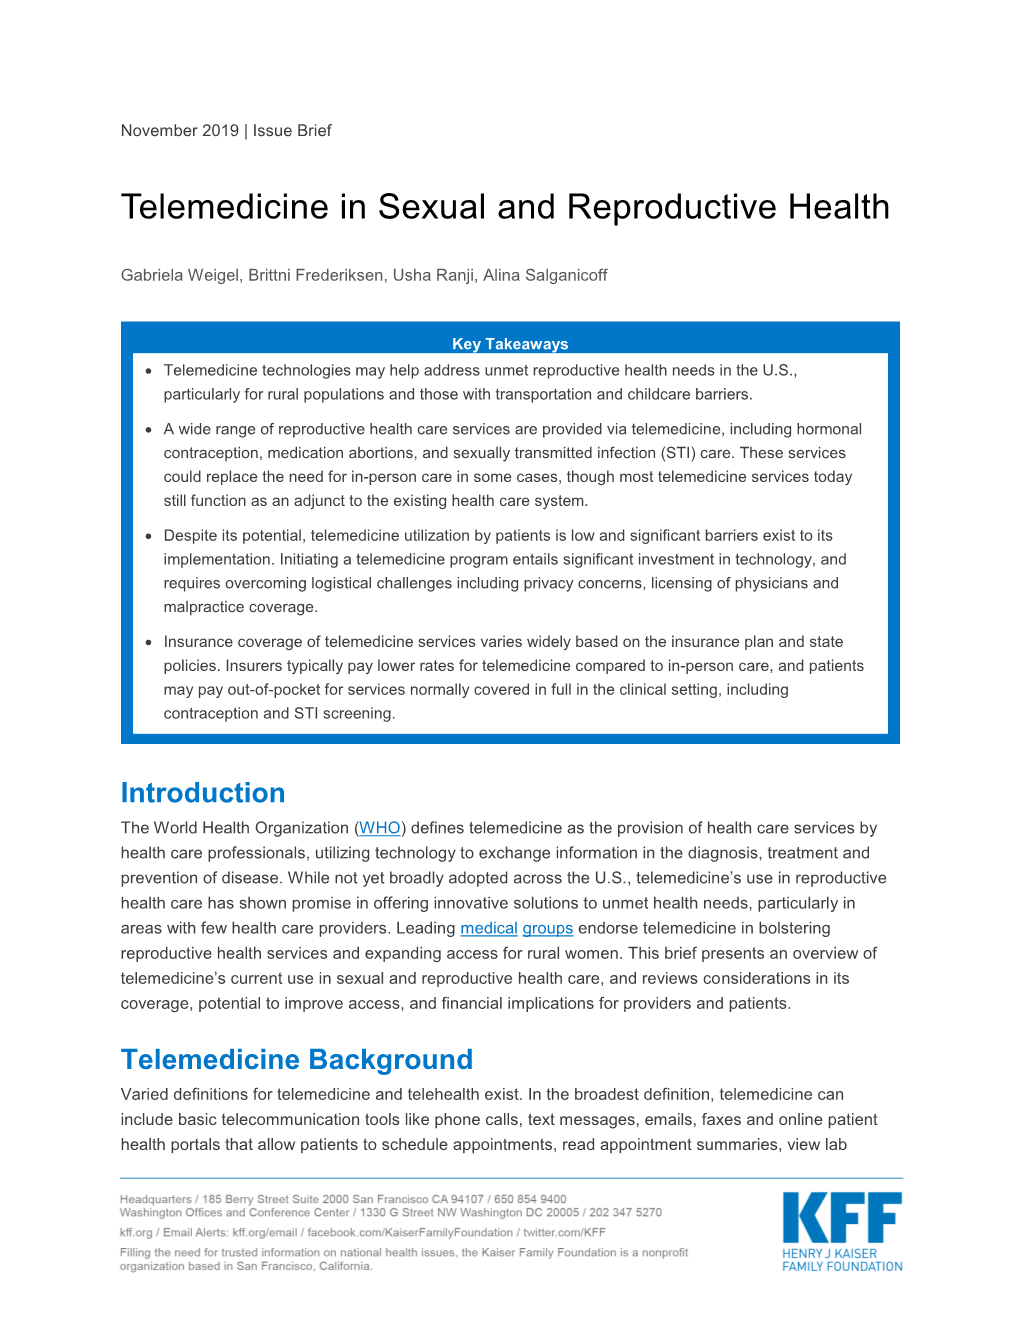 Telemedicine in Sexual and Reproductive Health